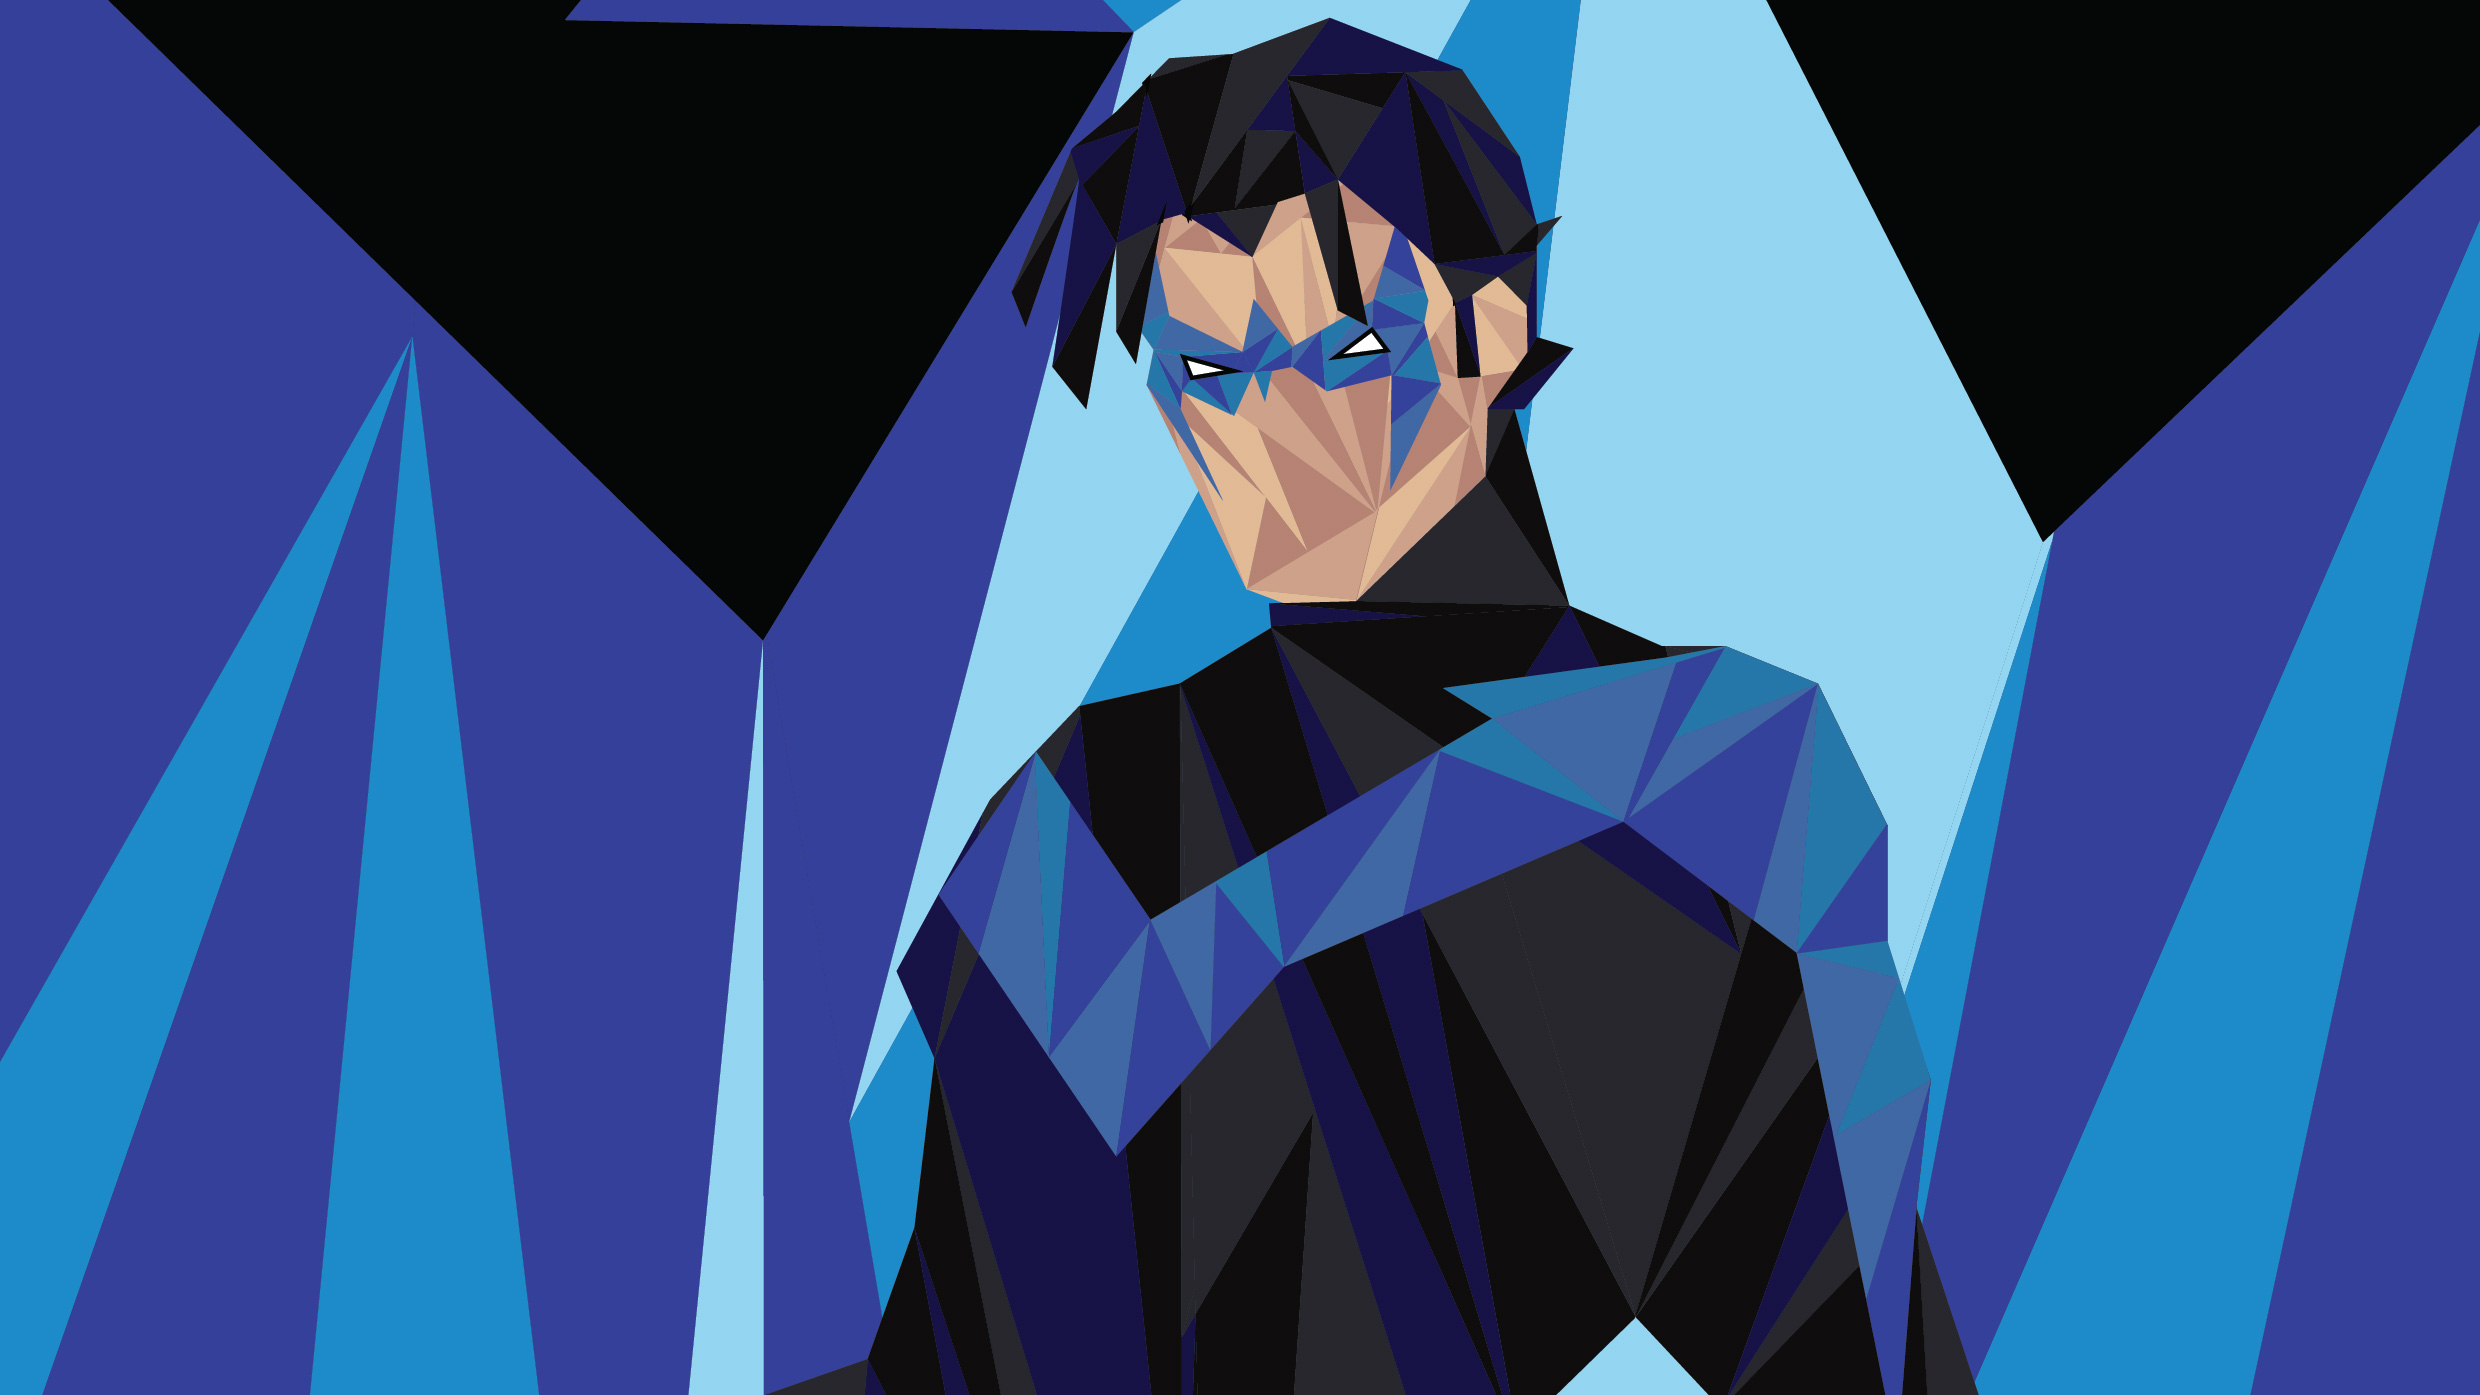 Nightwing Low Poly Art Hd Superheroes 4k Wallpapers Images Backgrounds Photos And Pictures 9083